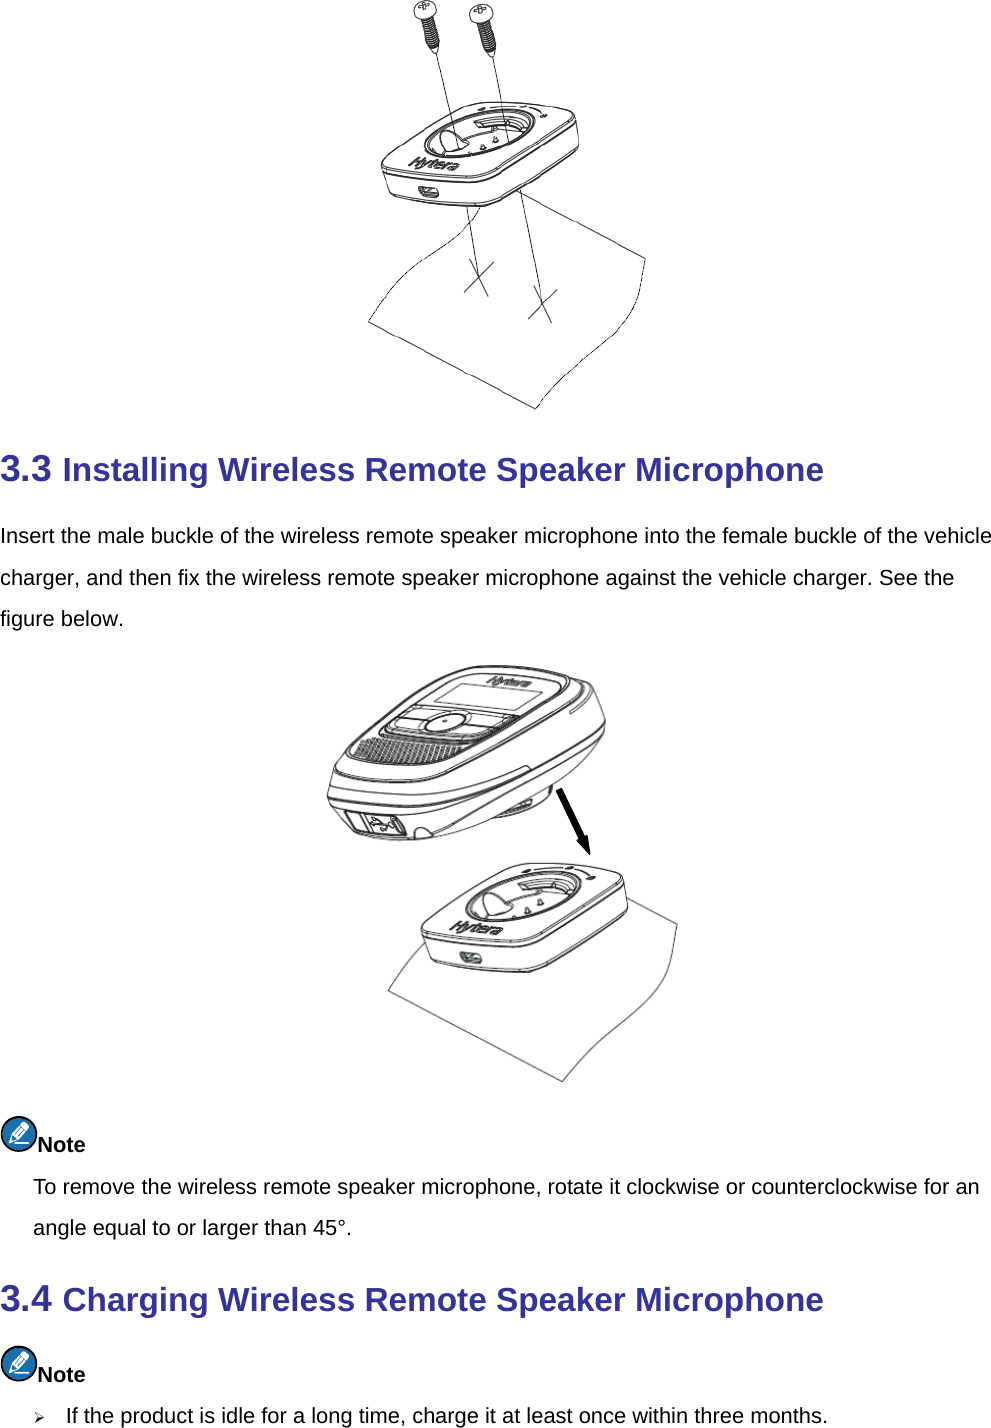   3.3 Installing Wireless Remote Speaker Microphone Insert the male buckle of the wireless remote speaker microphone into the female buckle of the vehicle charger, and then fix the wireless remote speaker microphone against the vehicle charger. See the figure below.    Note To remove the wireless remote speaker microphone, rotate it clockwise or counterclockwise for an angle equal to or larger than 45°.   3.4 Charging Wireless Remote Speaker Microphone Note ¾ If the product is idle for a long time, charge it at least once within three months.   